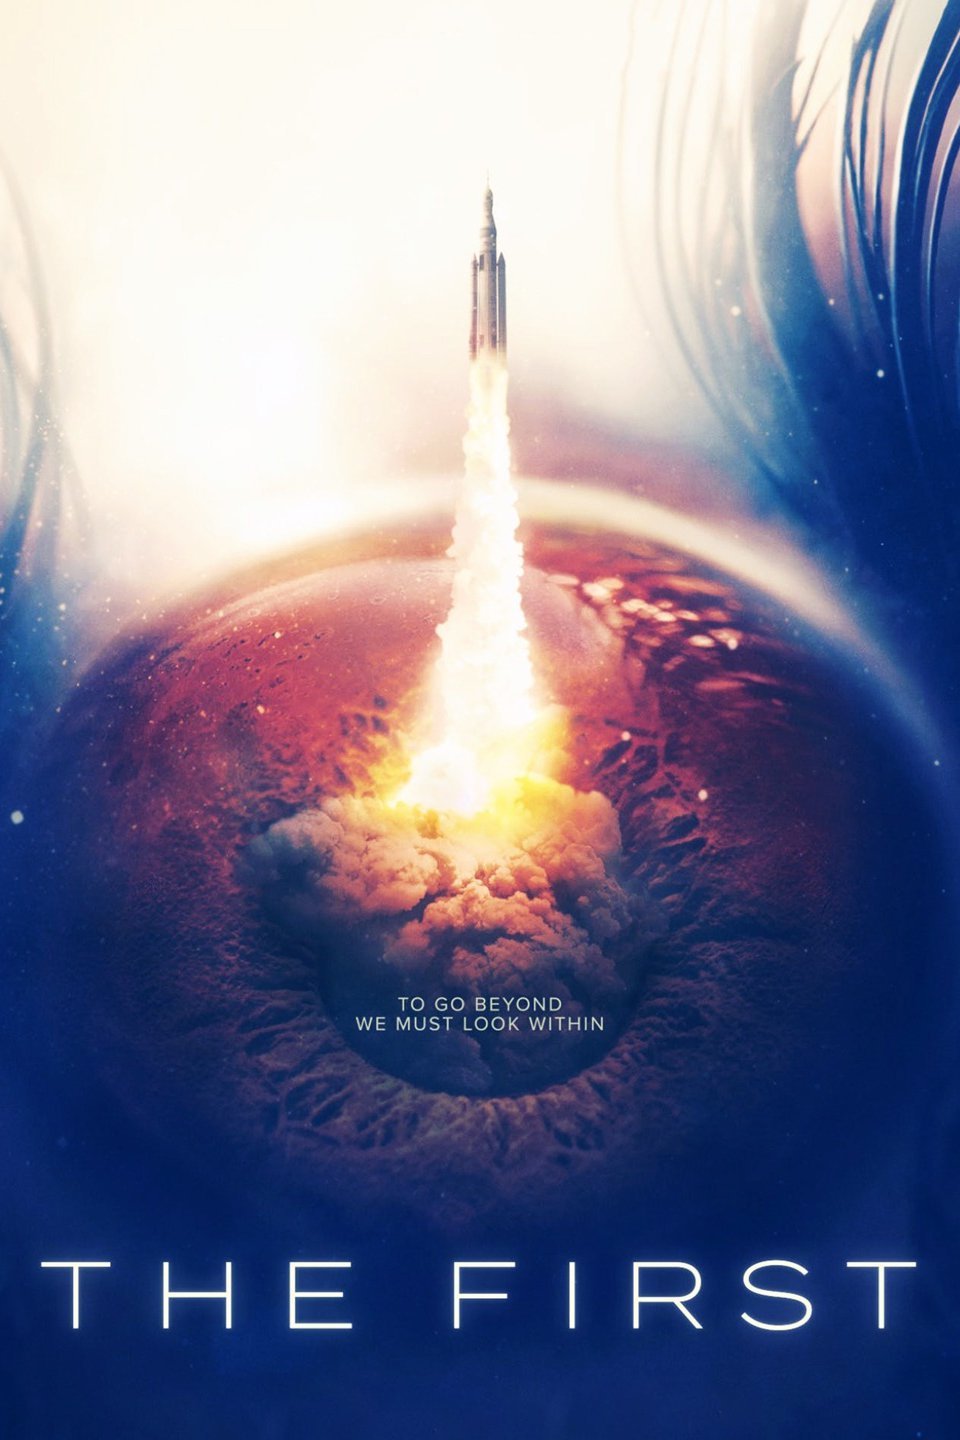 An image of the movie poster for the science fiction series The First, a near-future space exploration adventure as the first humans travel to Mars. 